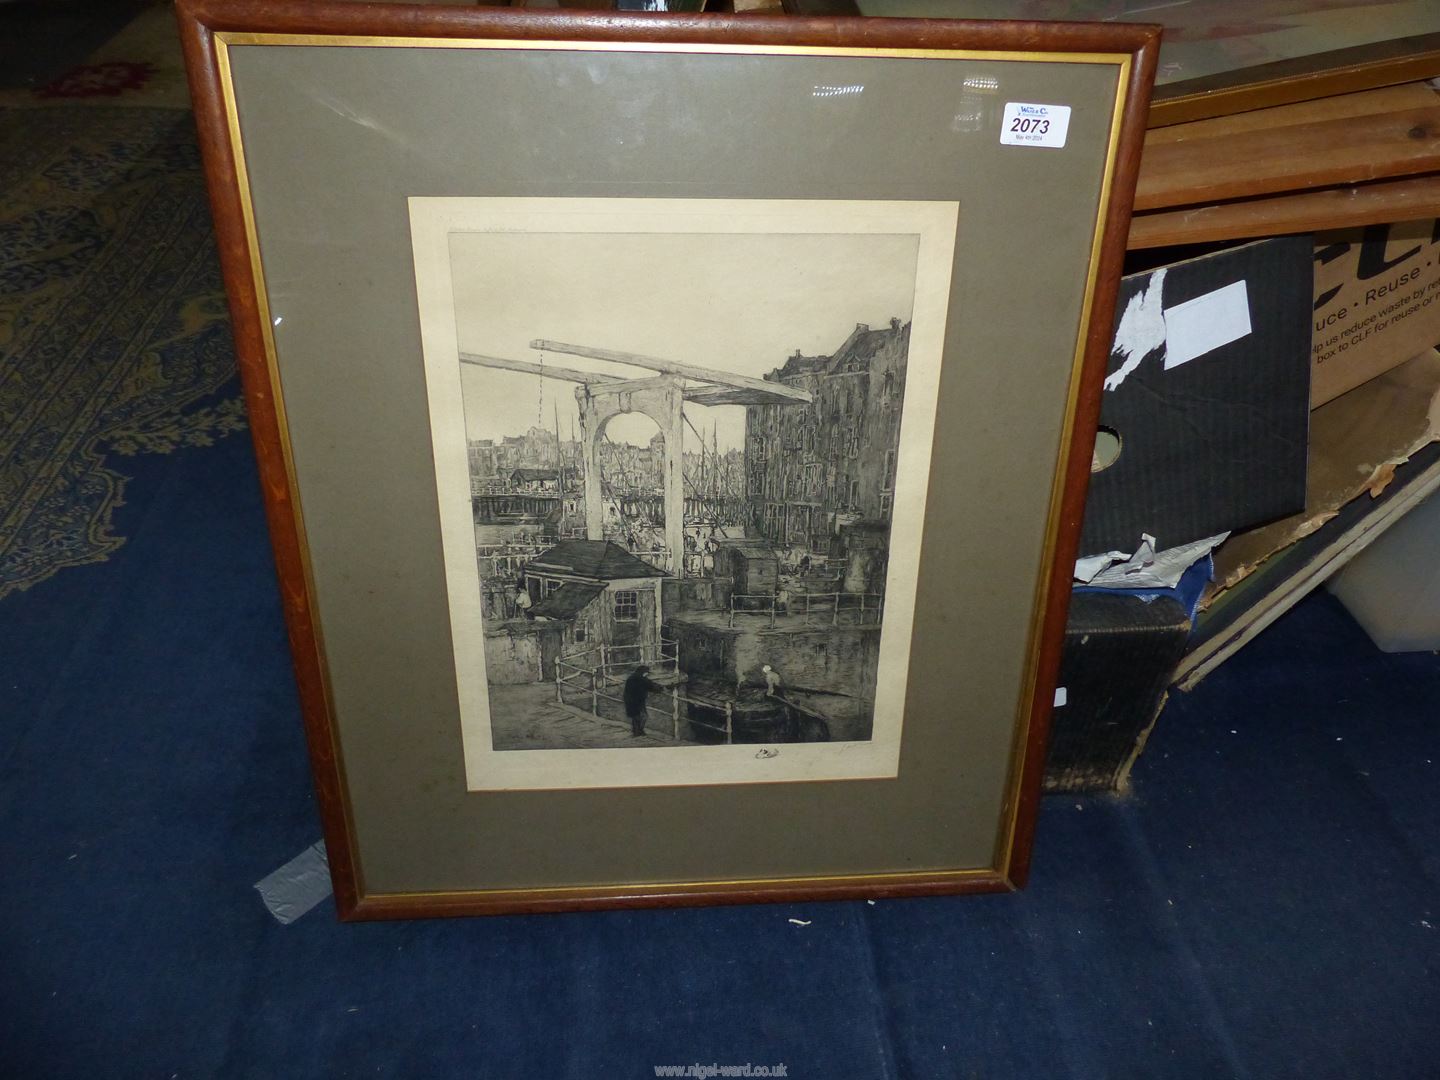 A large Lithograph Print depicting a canal scene in Amsterdam, signed M.